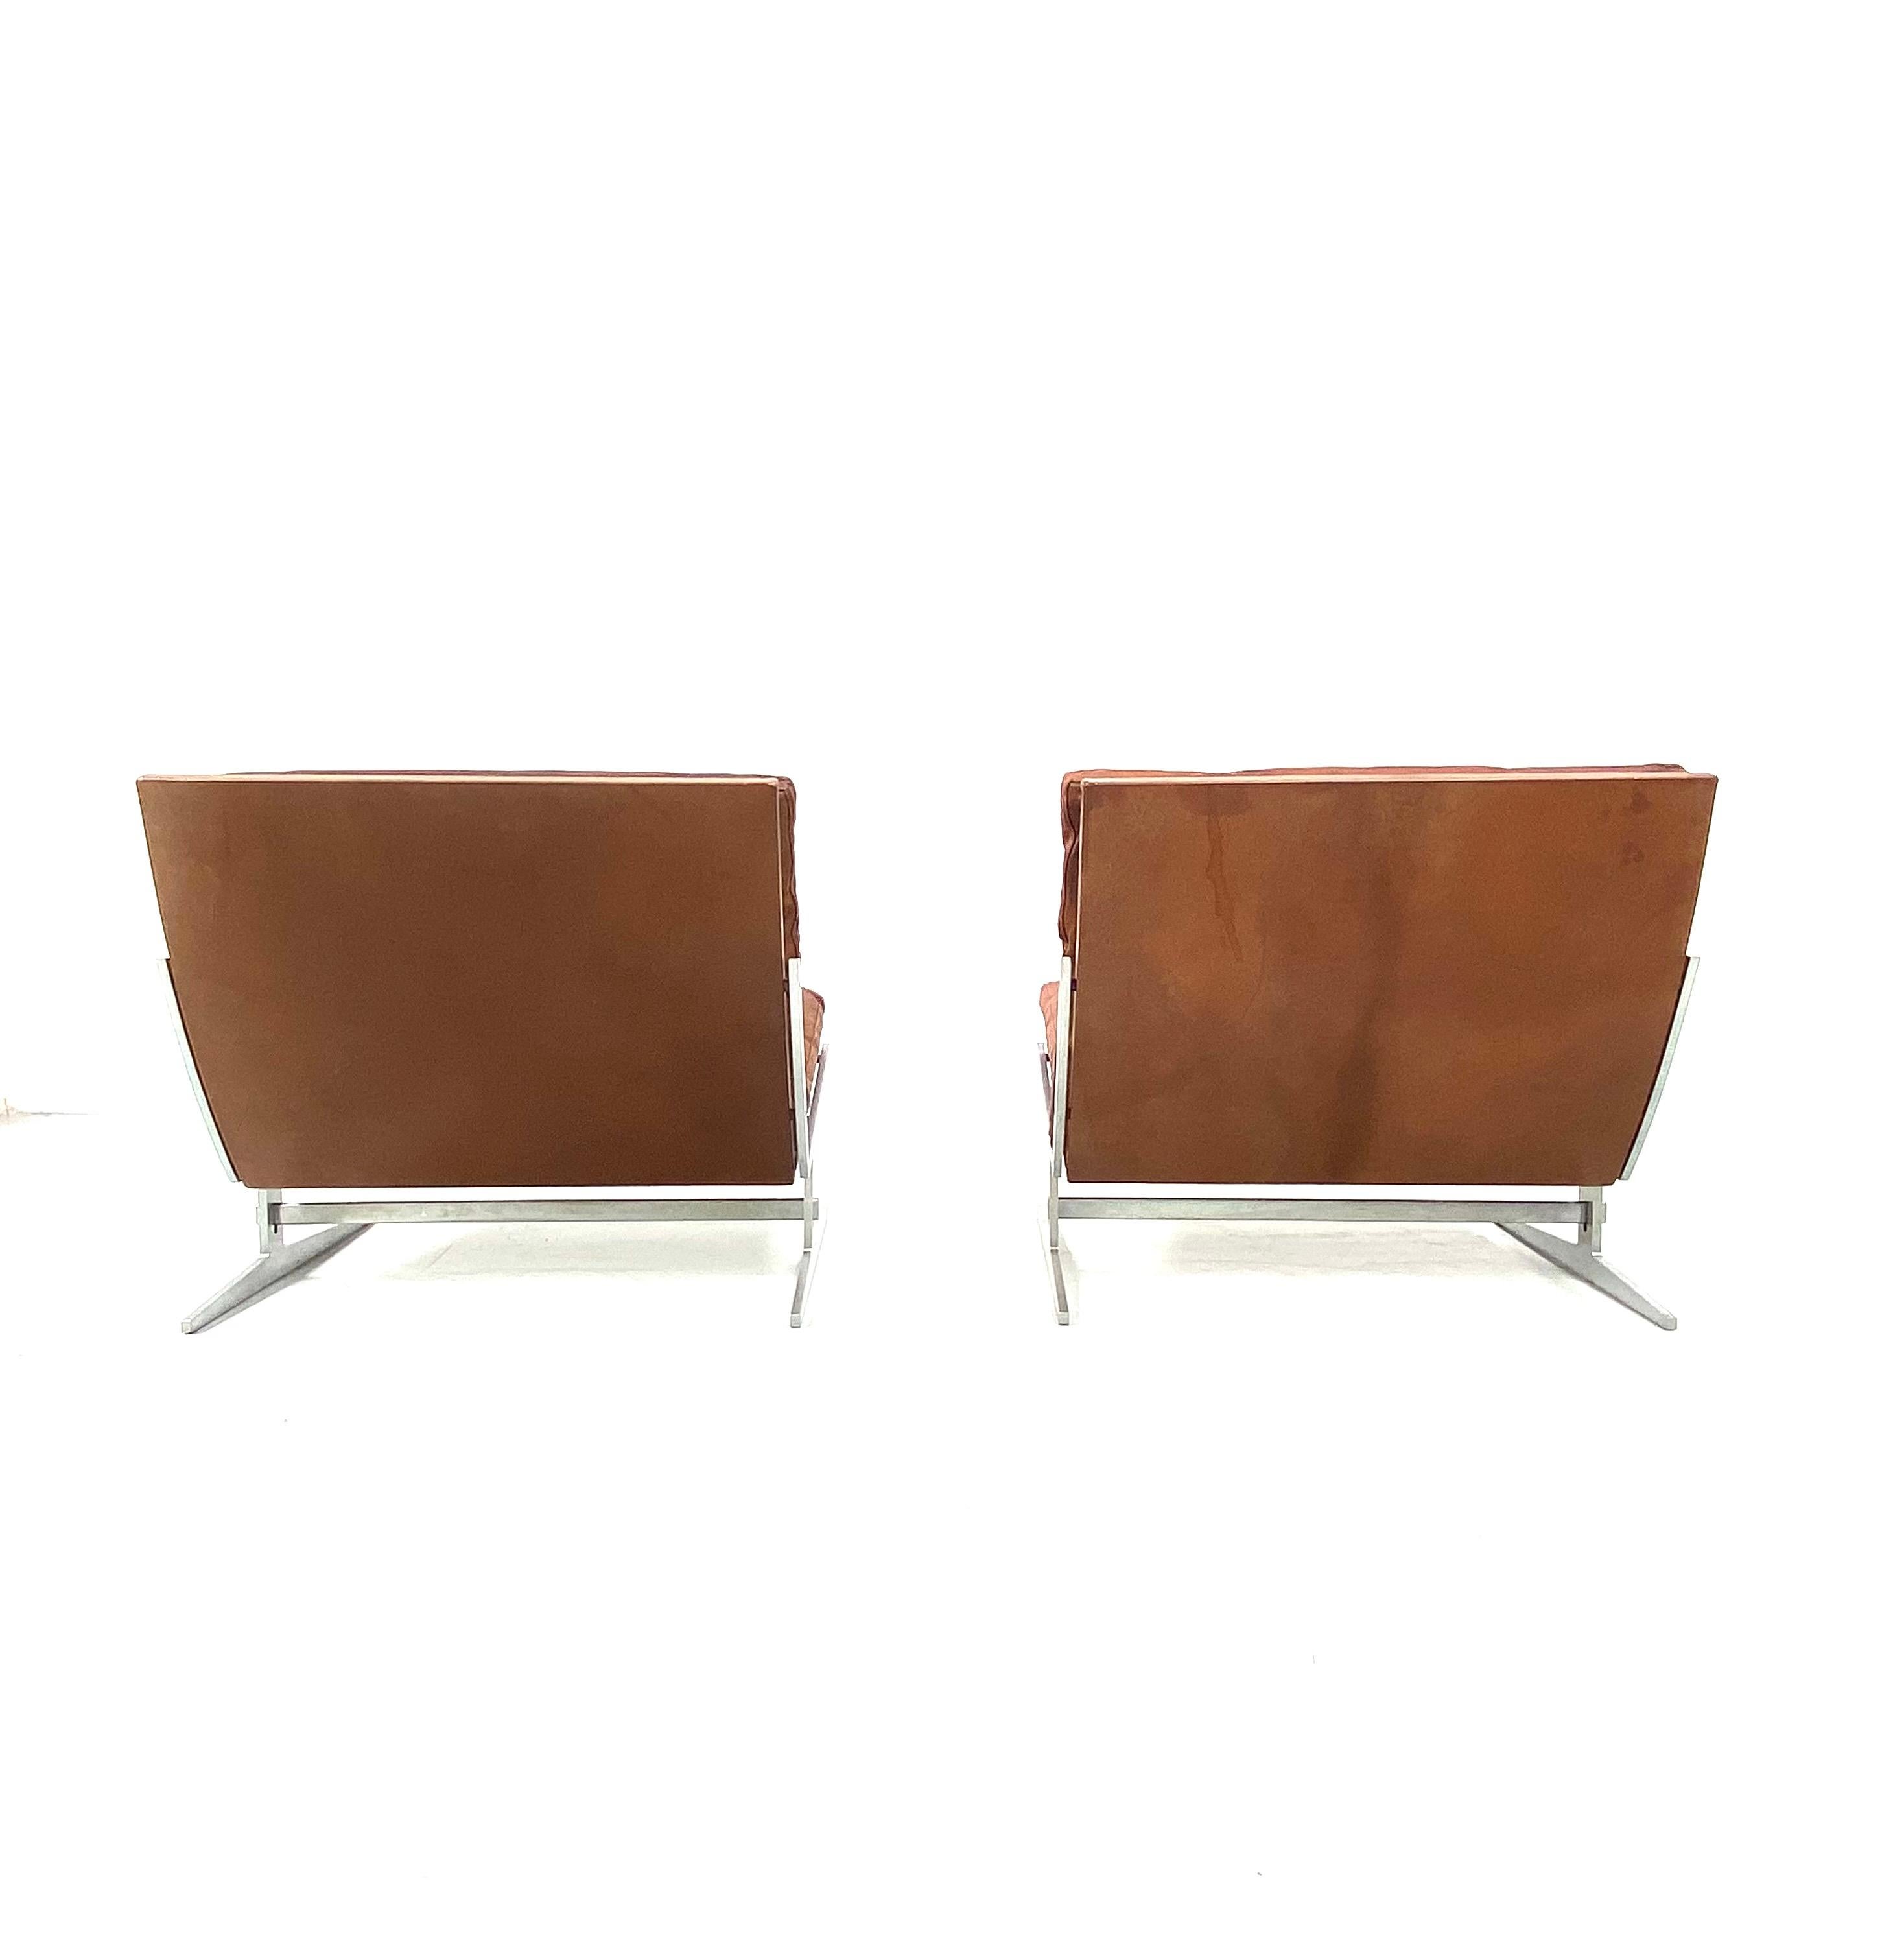 Stainless Steel Danish BO-561 Lounge Chairs in Cognac by Fabricius and Kastholm for BoEx, 1960s